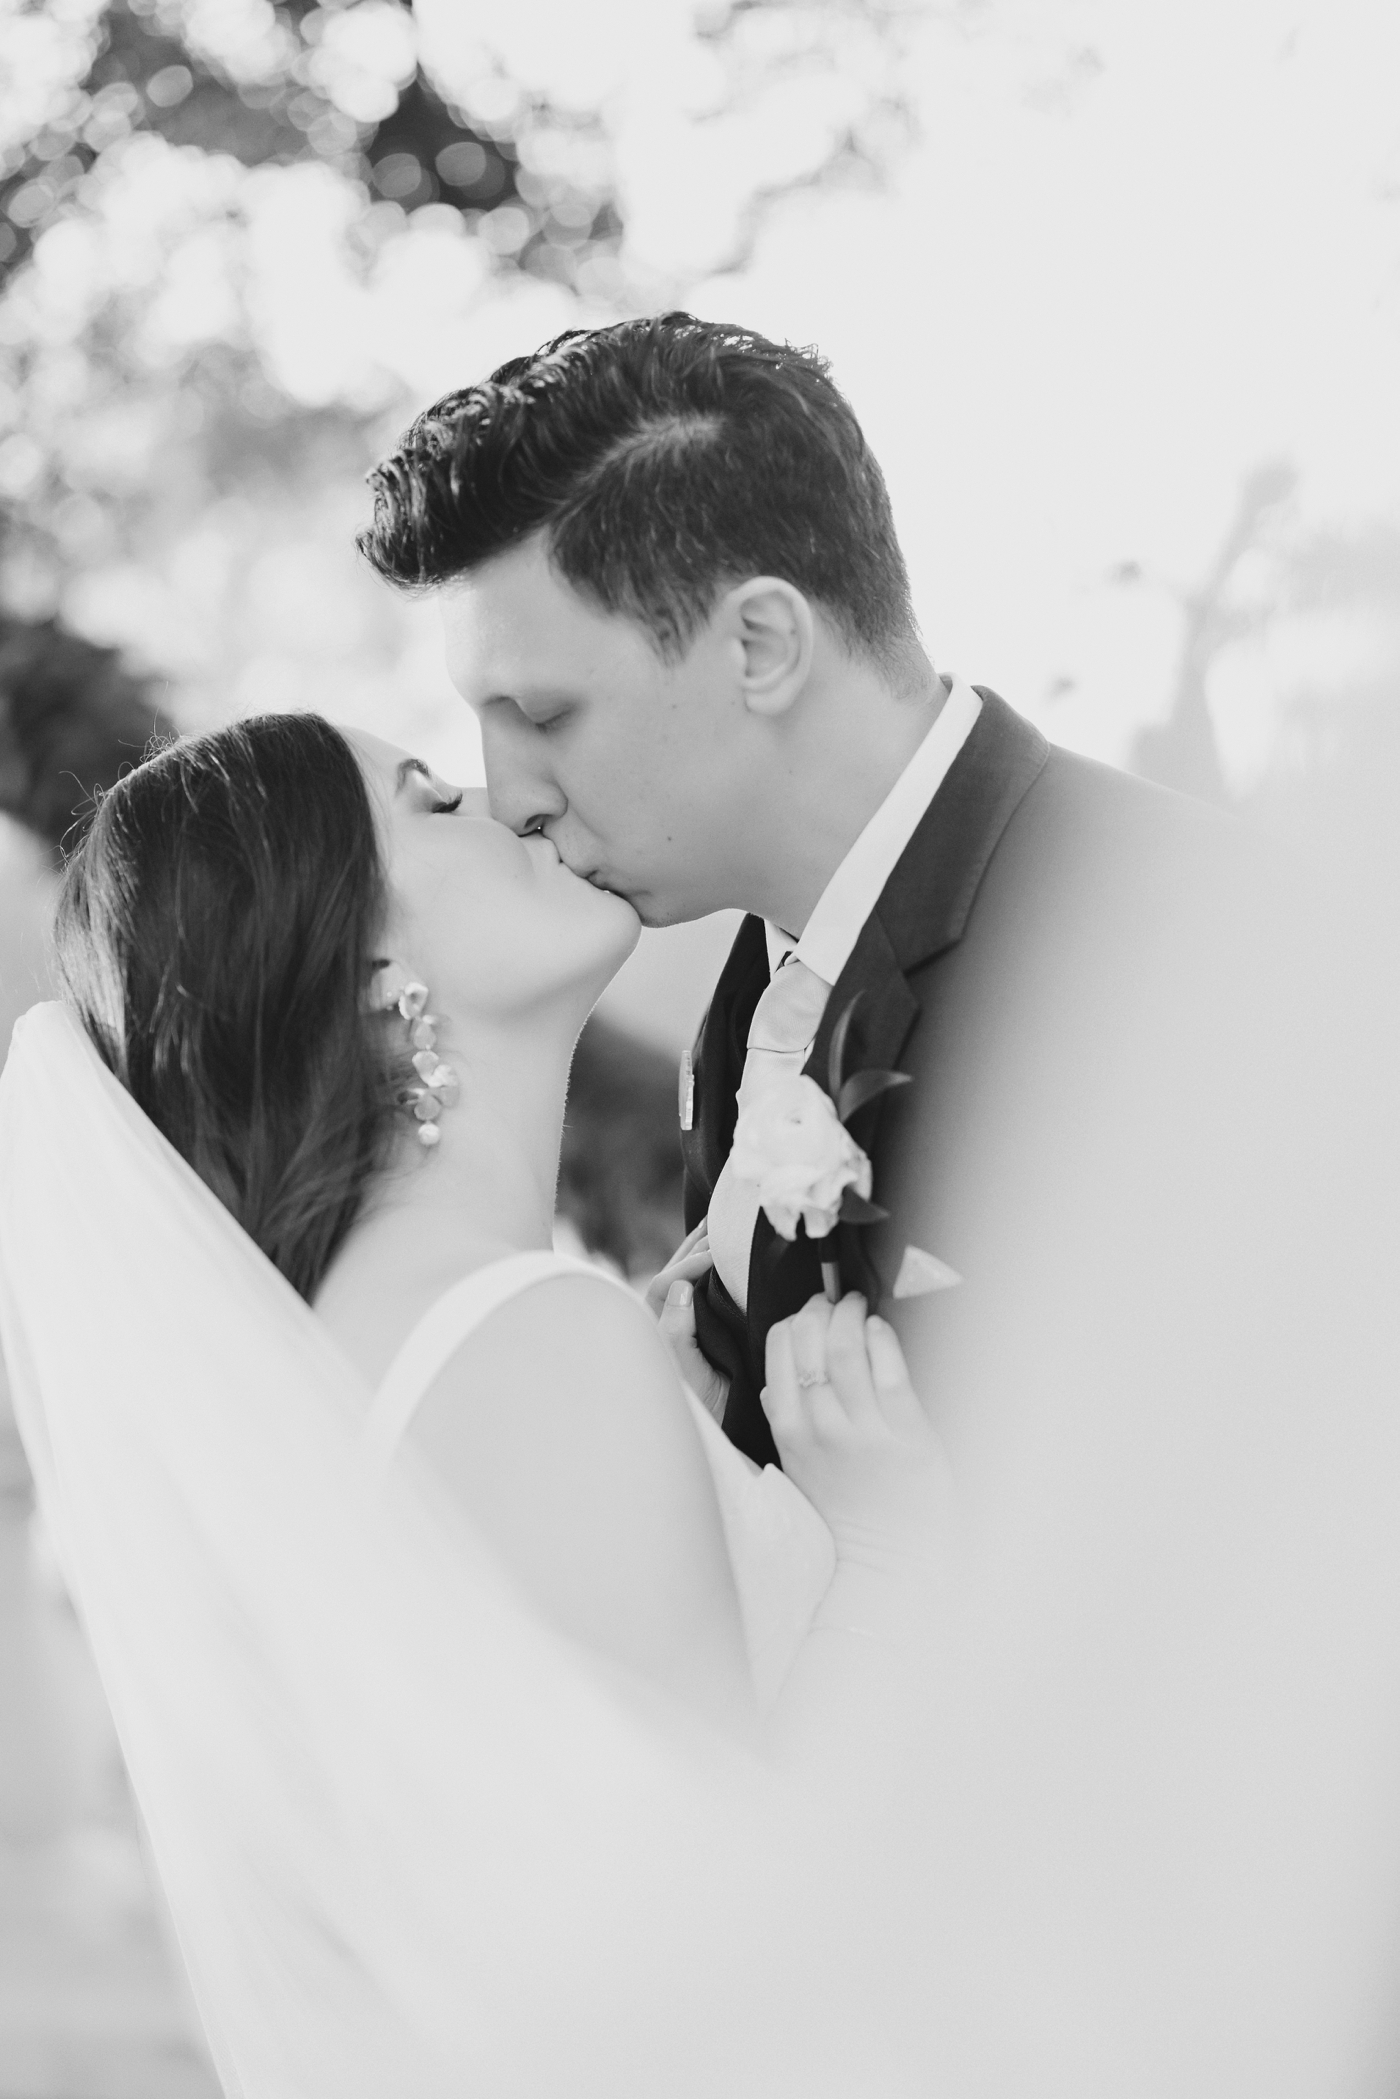 Black and white portrait of the bride and groom